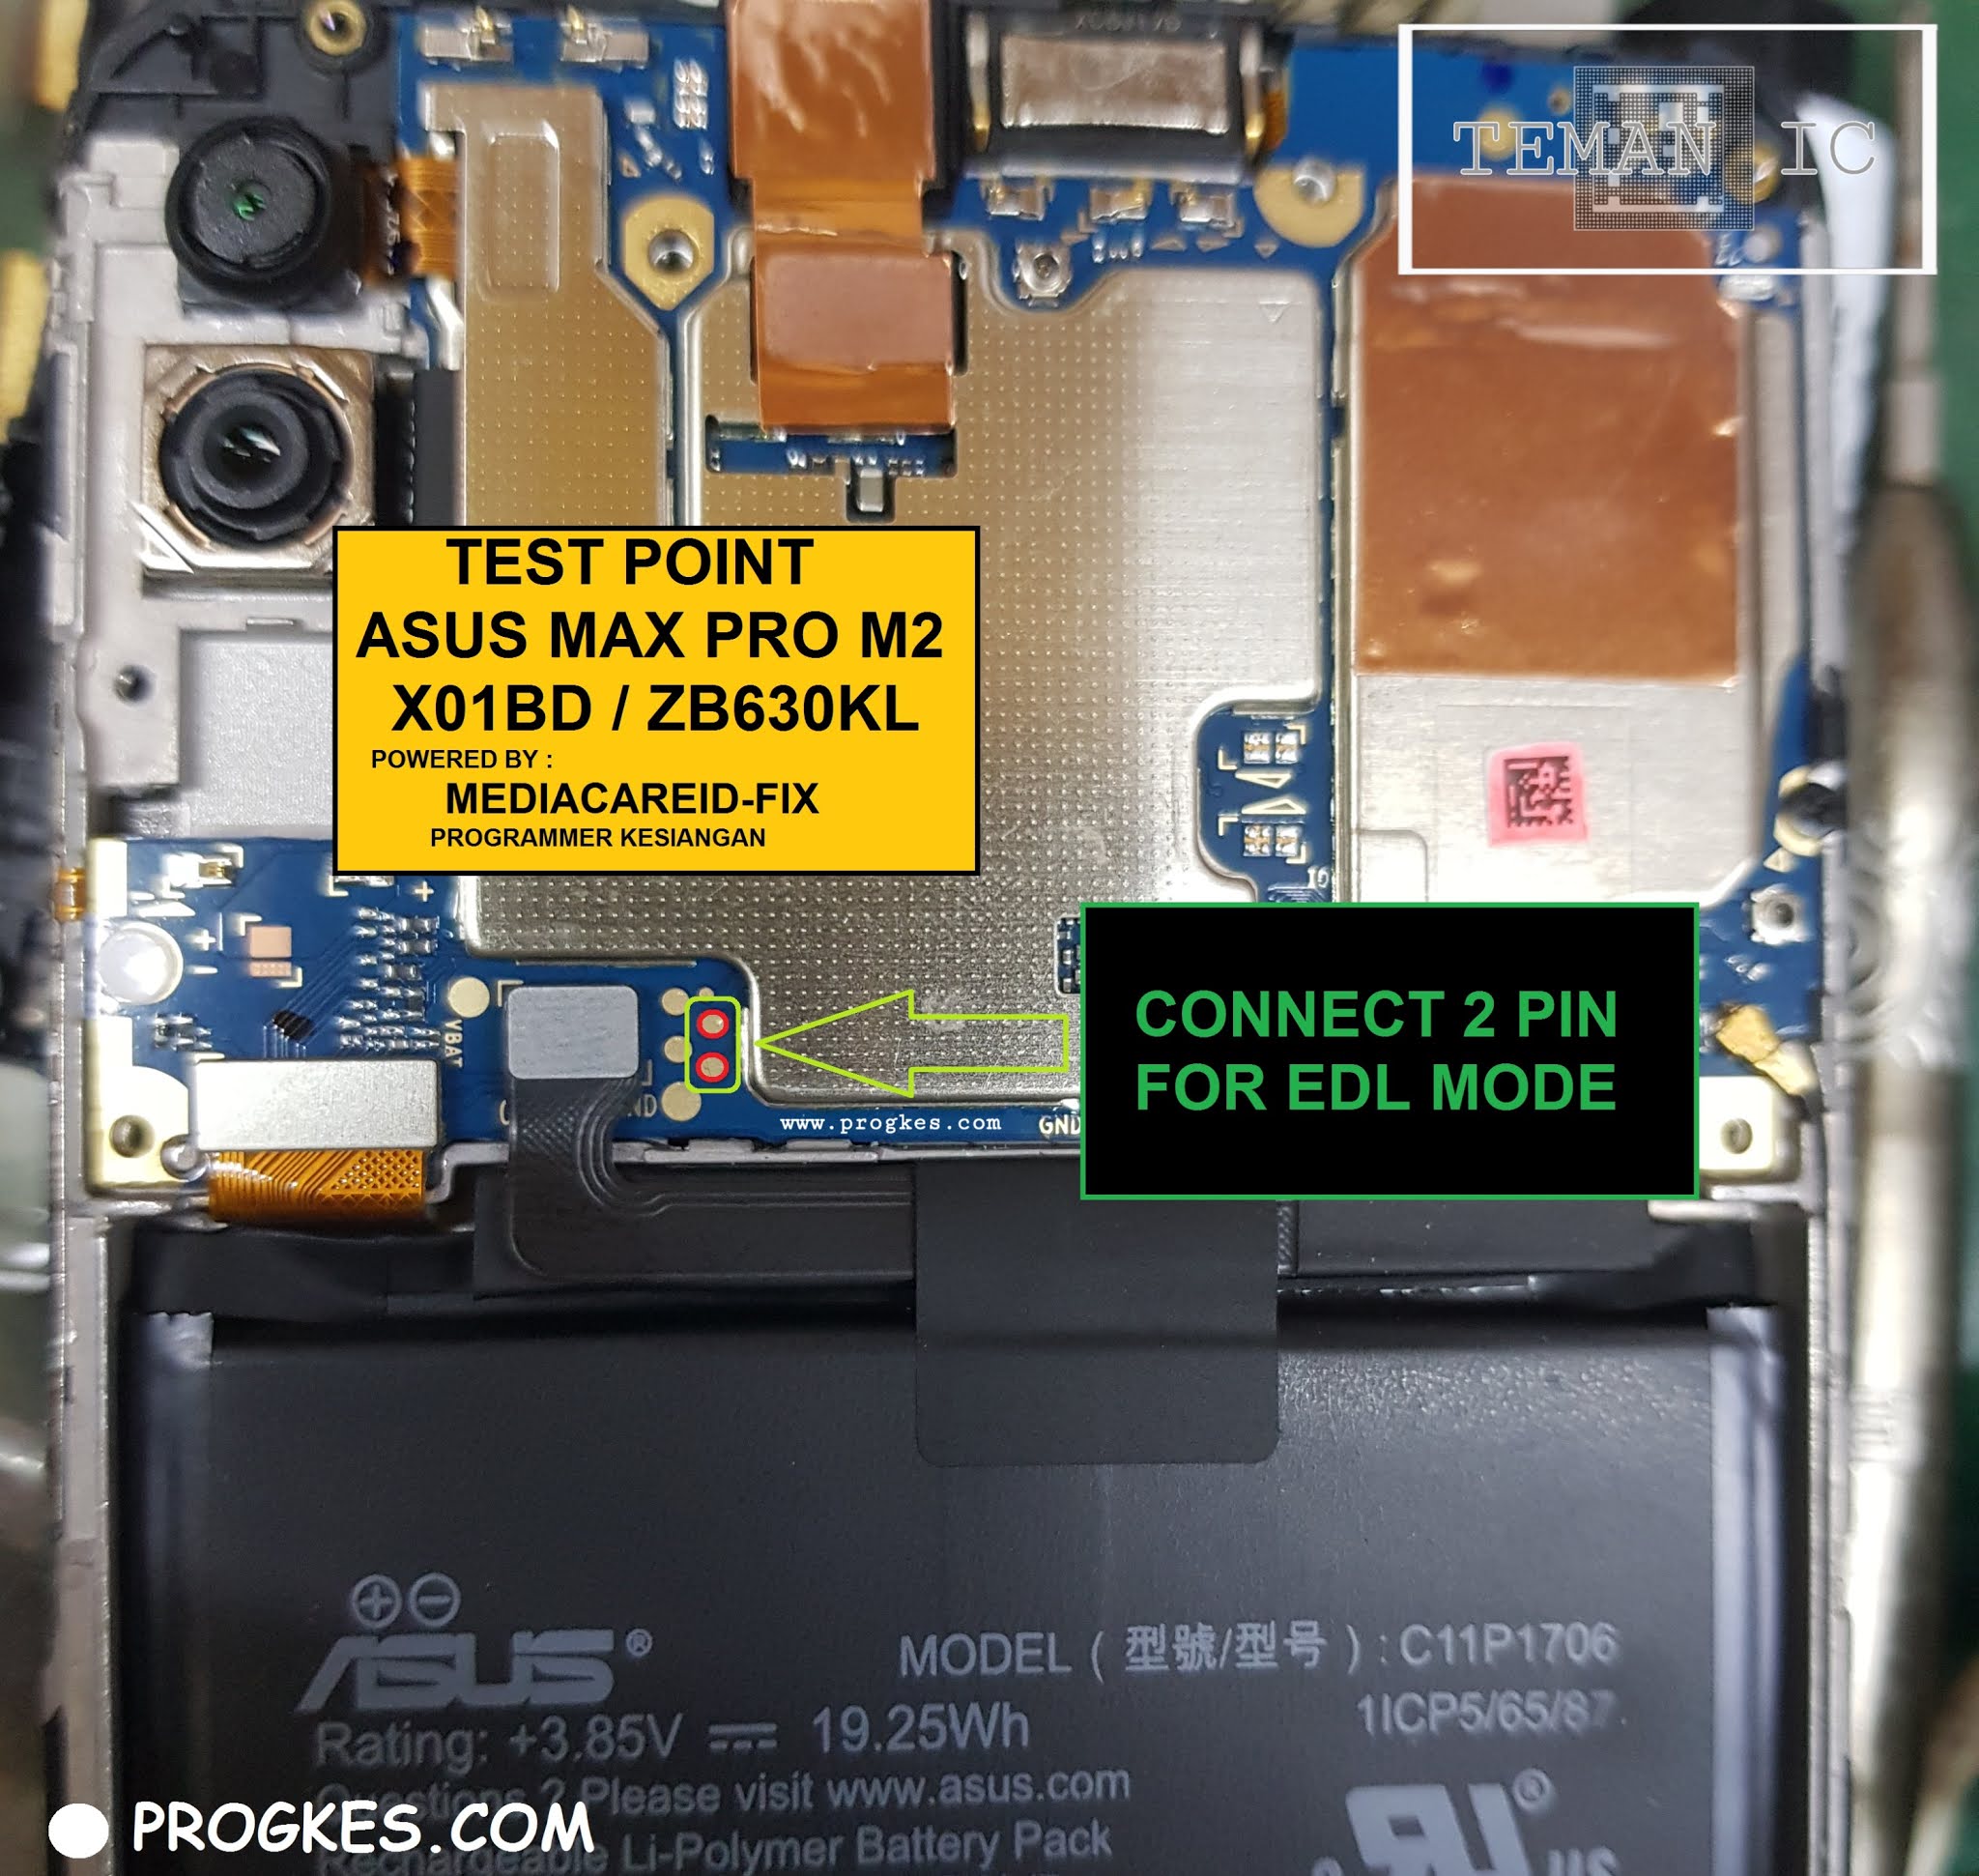 Asus Zenfone Max M2 Edl Point / Asus Xt00td Edl Point Gadget To Review